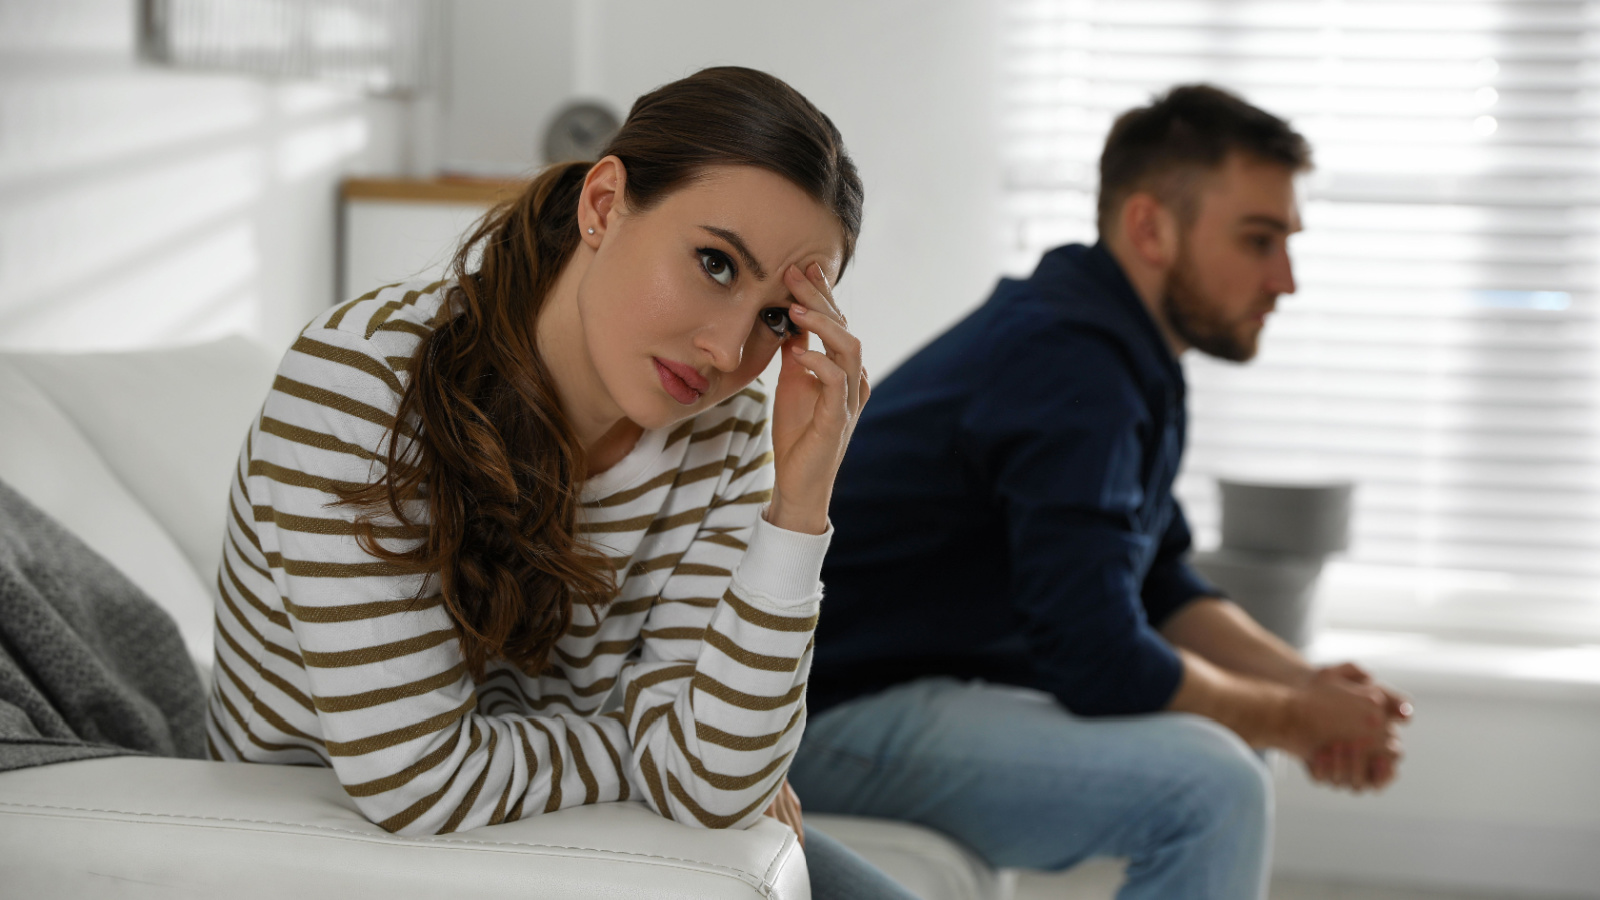 image credit: new-africa/shutterstock <p><span>Contrary to this myth, fights aren’t always a sign of a failing relationship. How couples fight and resolve conflicts is more important. Constructive arguments can lead to greater understanding and stronger bonds. It’s about fighting fair and finding solutions, not avoiding conflict entirely.</span></p>